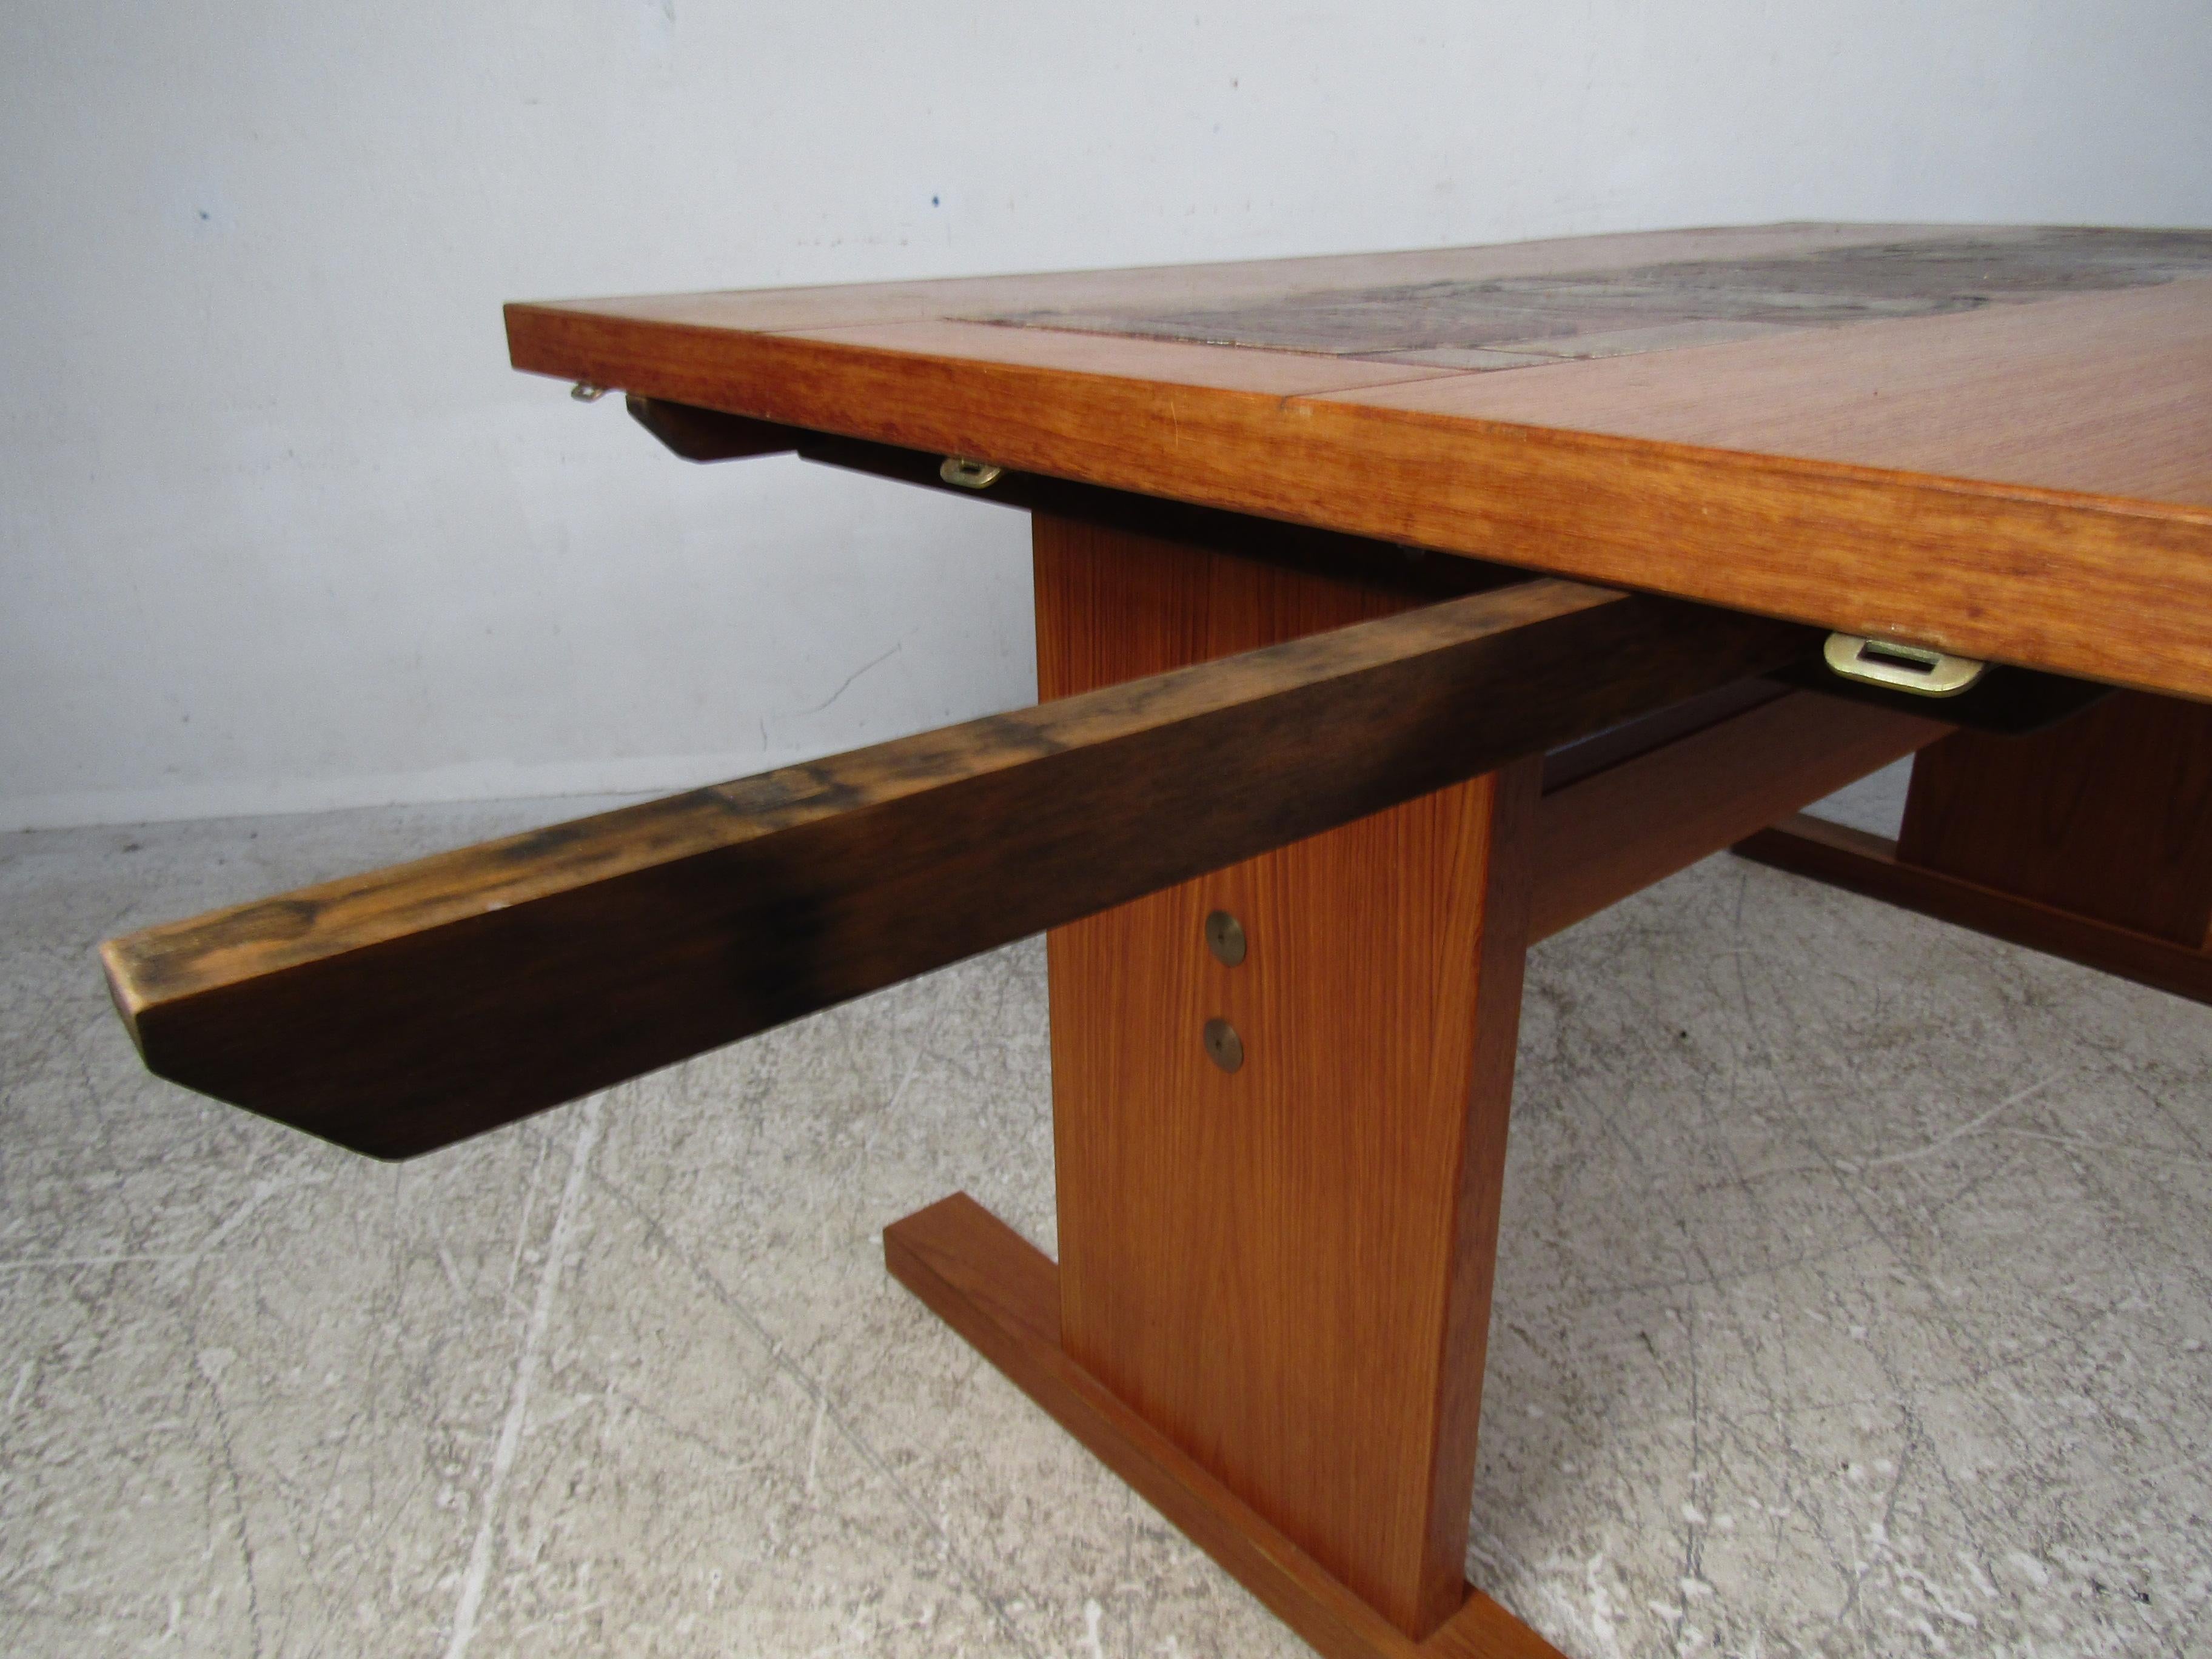 20th Century Danish Modern Drop-Leaf Dining Table with Tile Inlays For Sale